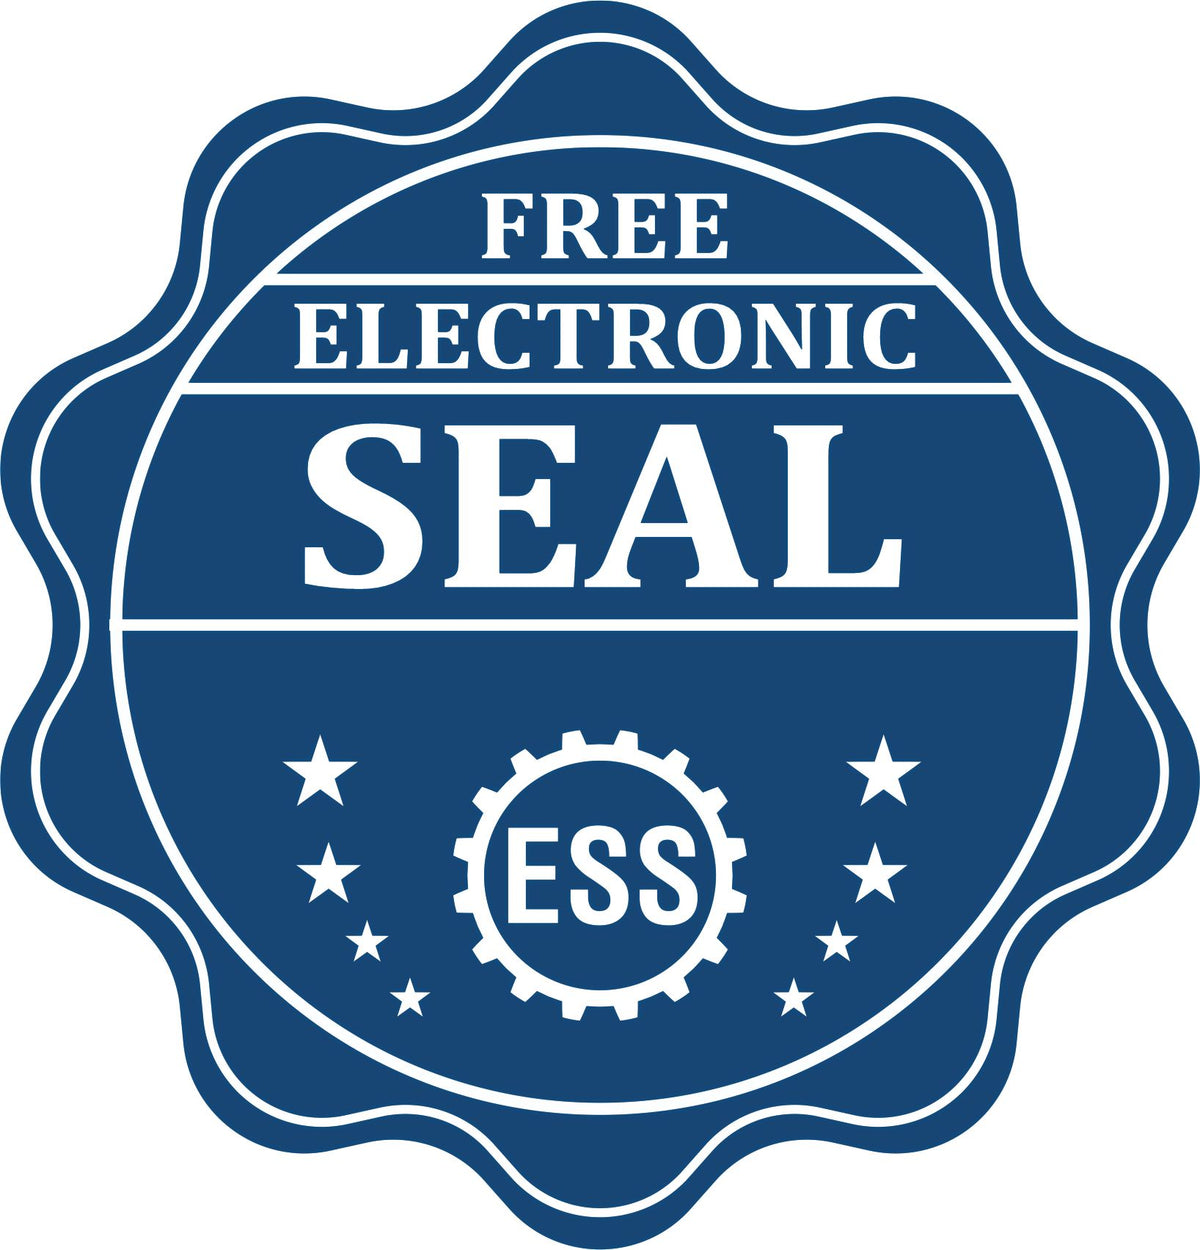 A badge showing a free electronic seal for the MaxLight Premium Pre-Inked Ohio State Seal Notarial Stamp with stars and the ESS gear on the emblem.